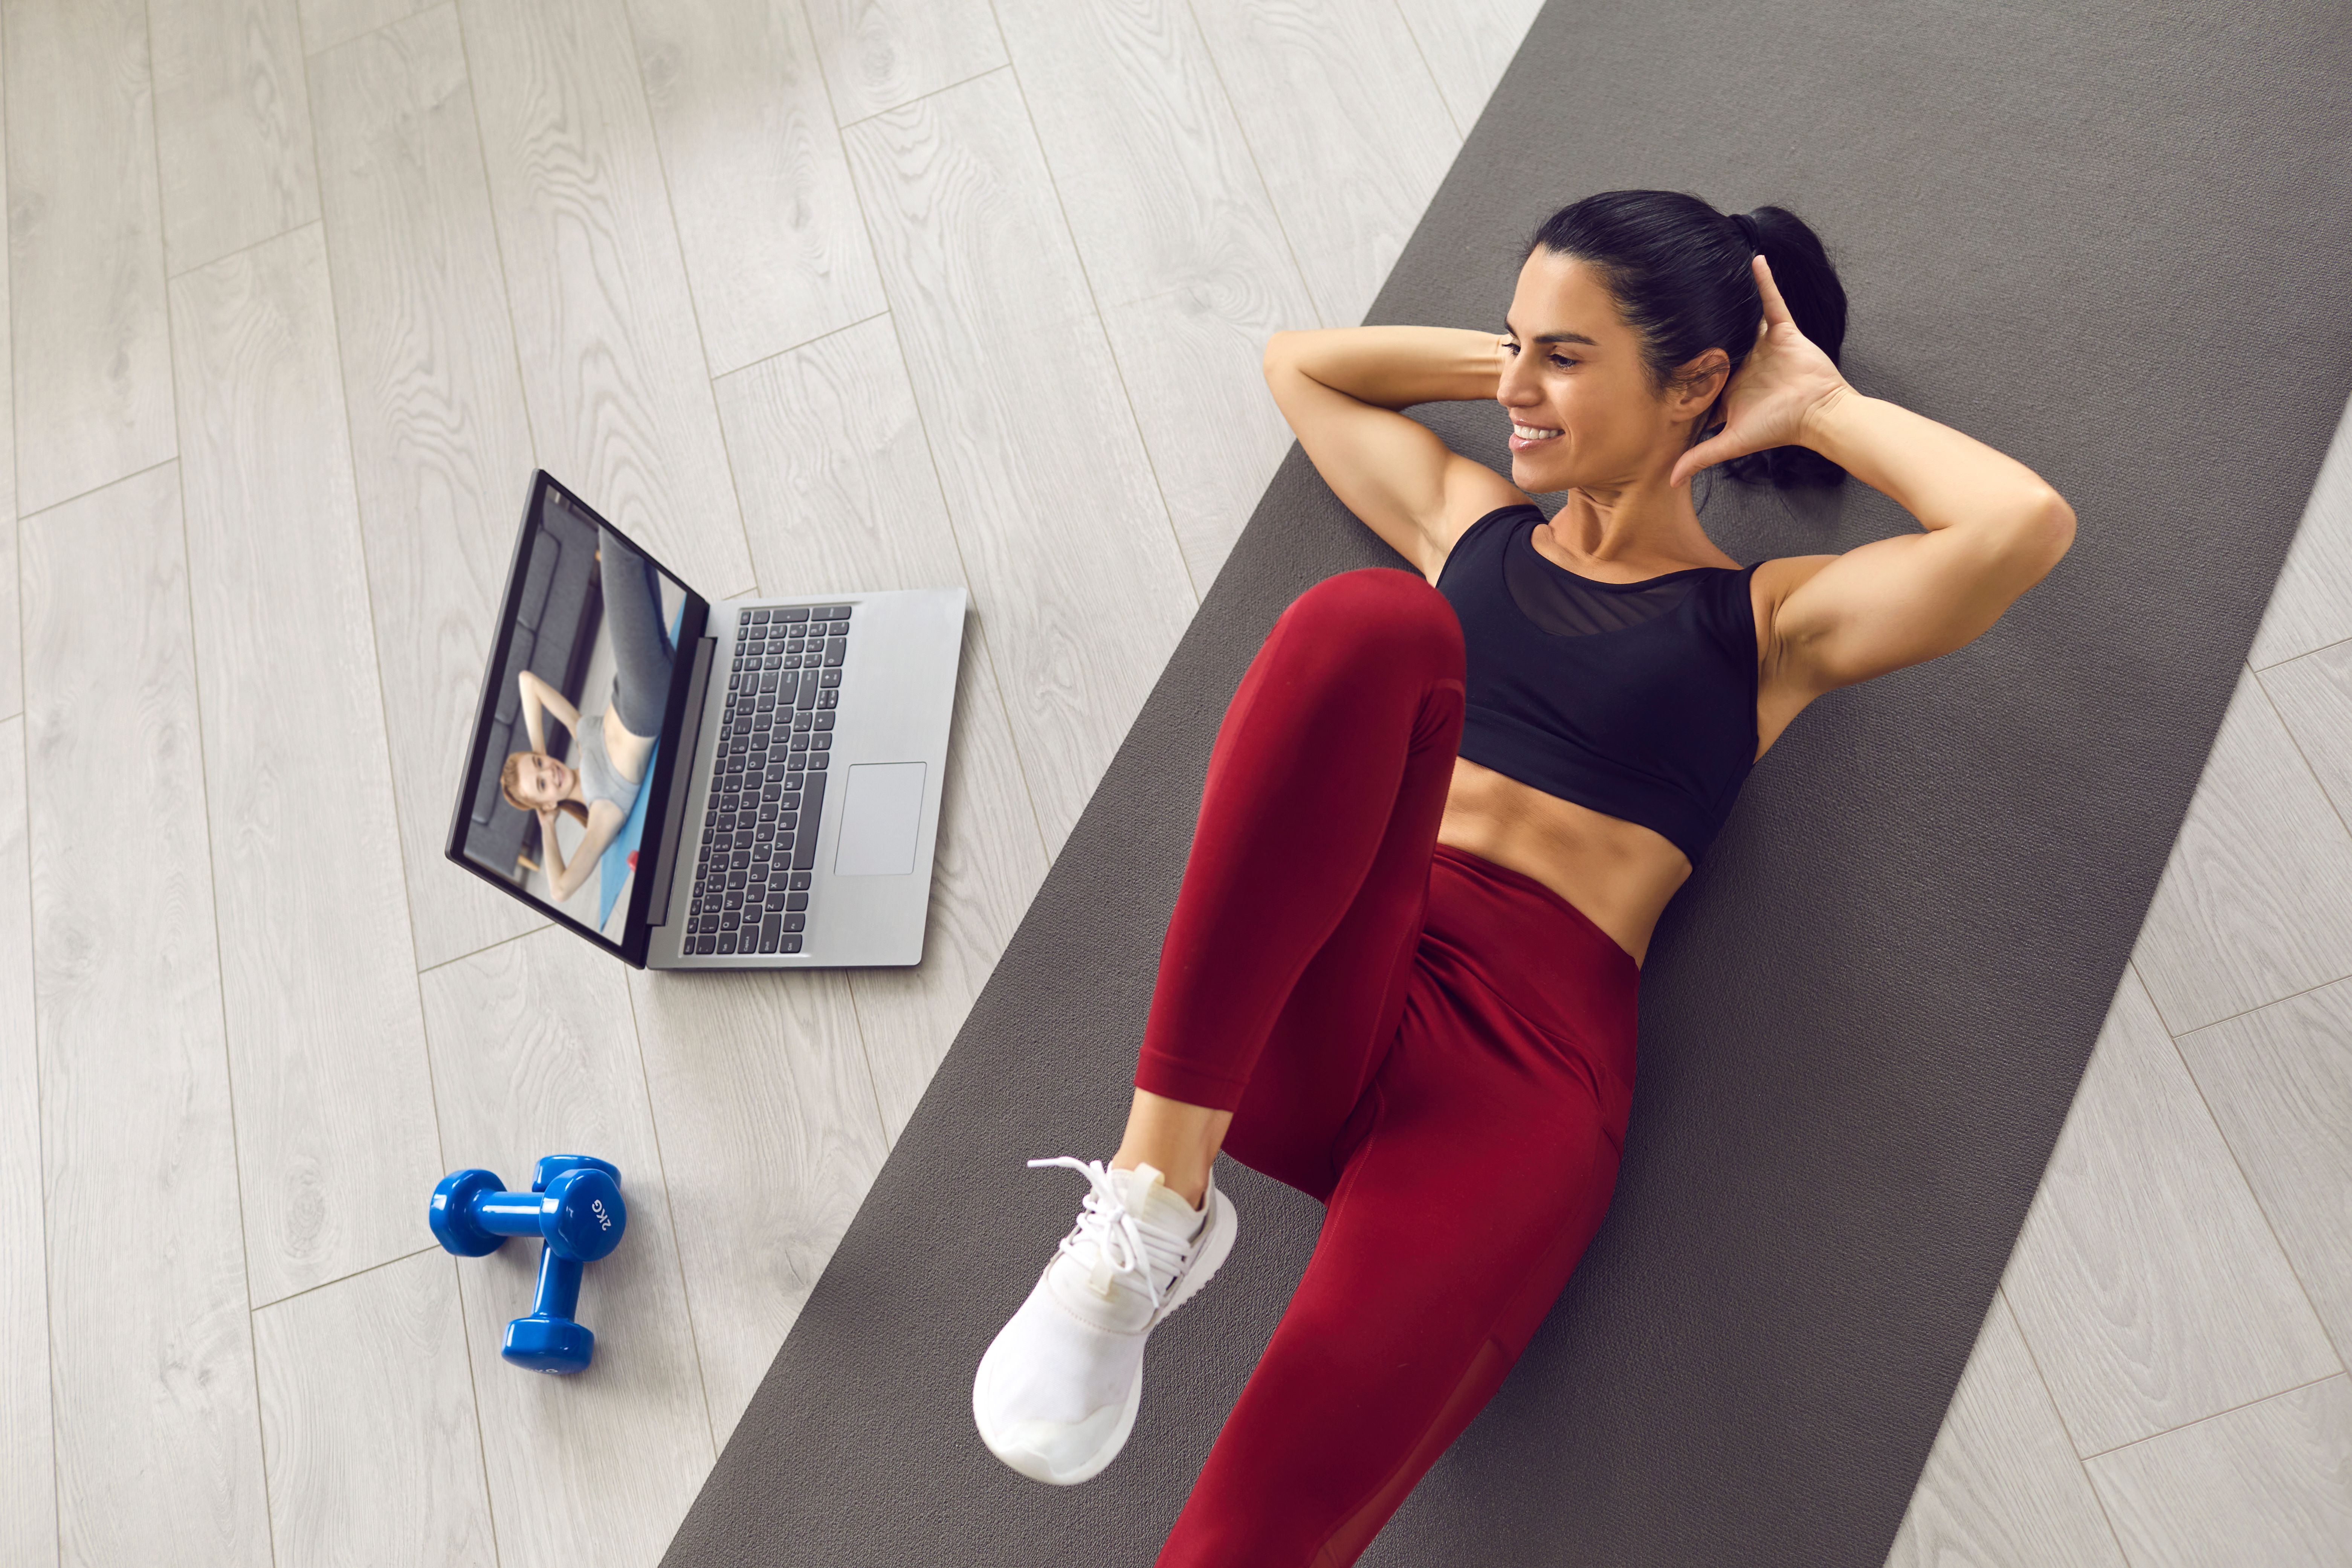 Young woman performs a core workout on exercise mat in front of open laptop. 